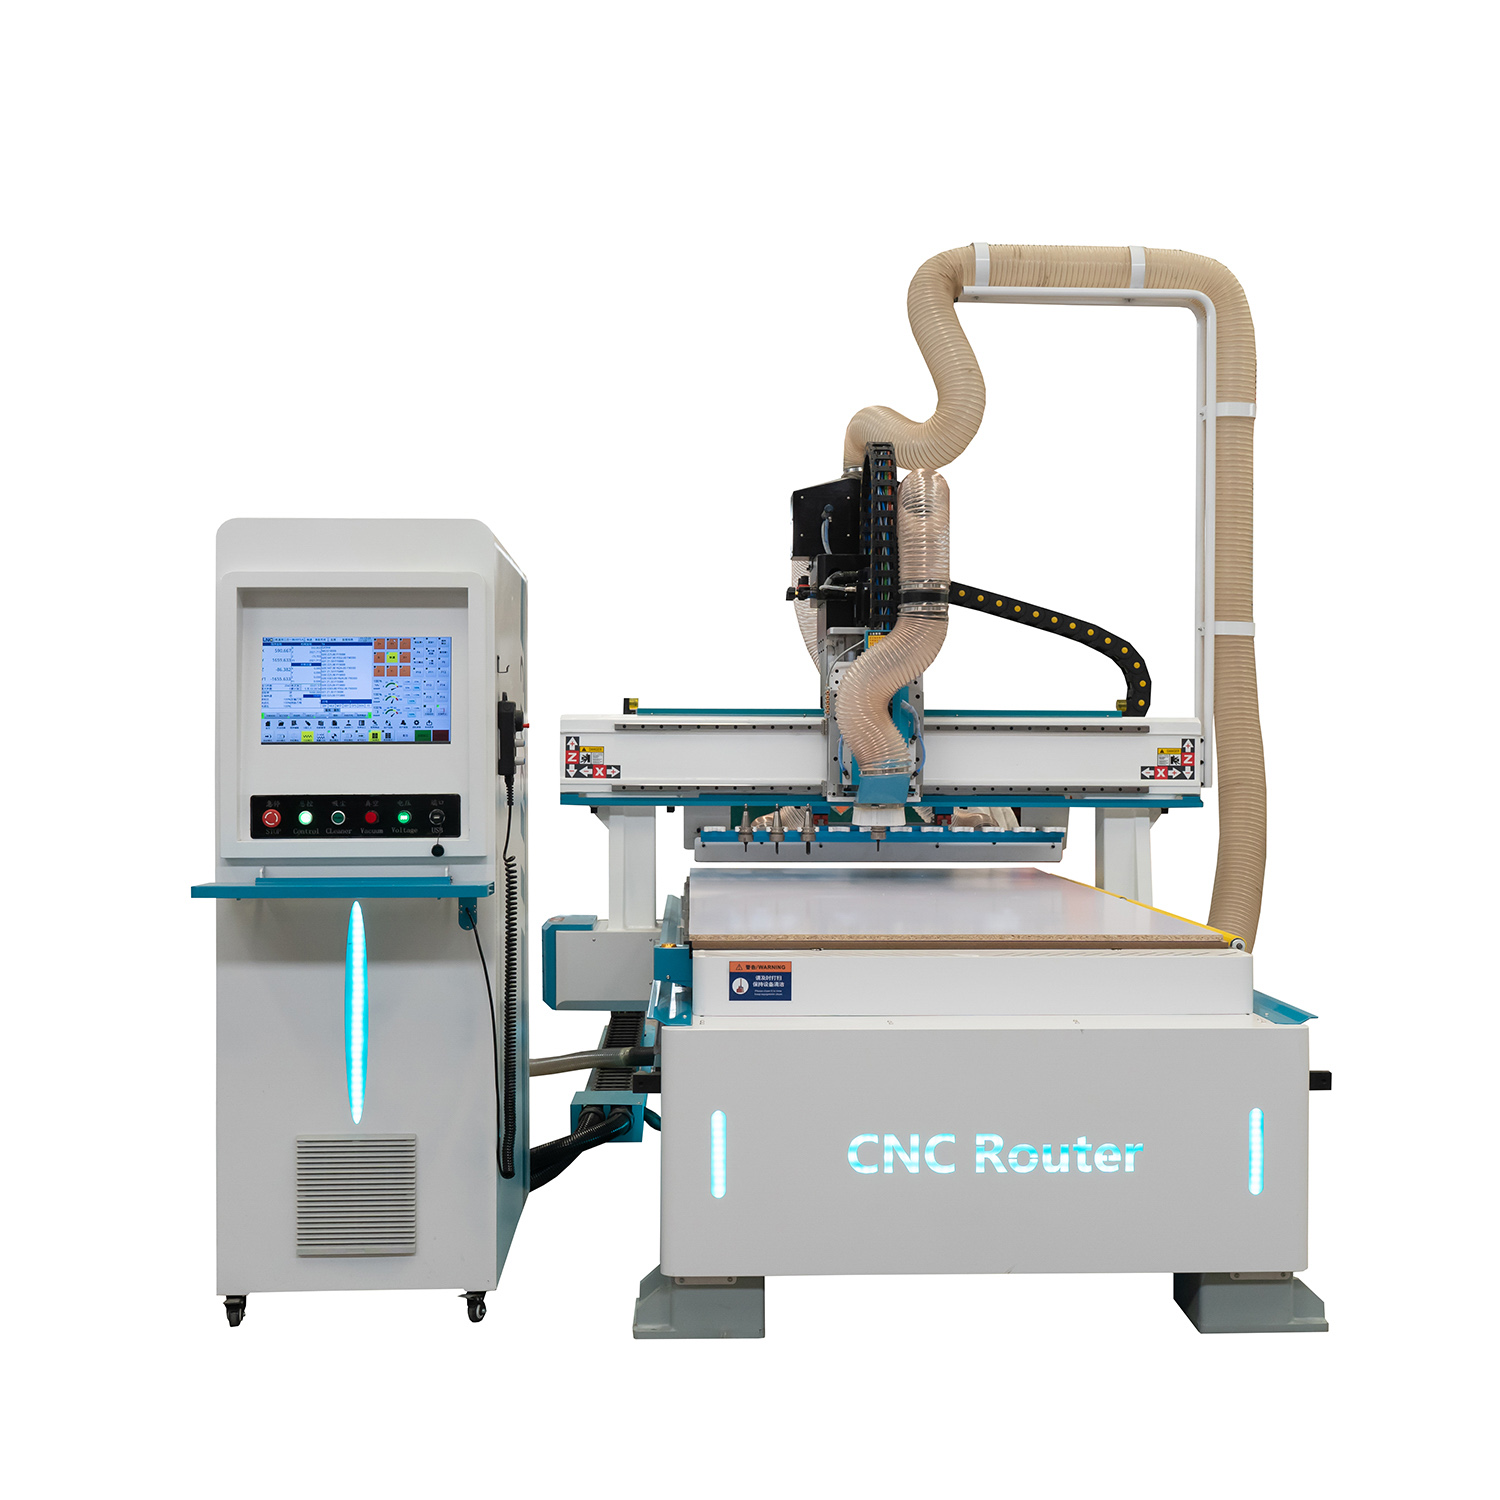 Powerful,Highly Versatile Automatic Tool Change CNC Router Featured Image